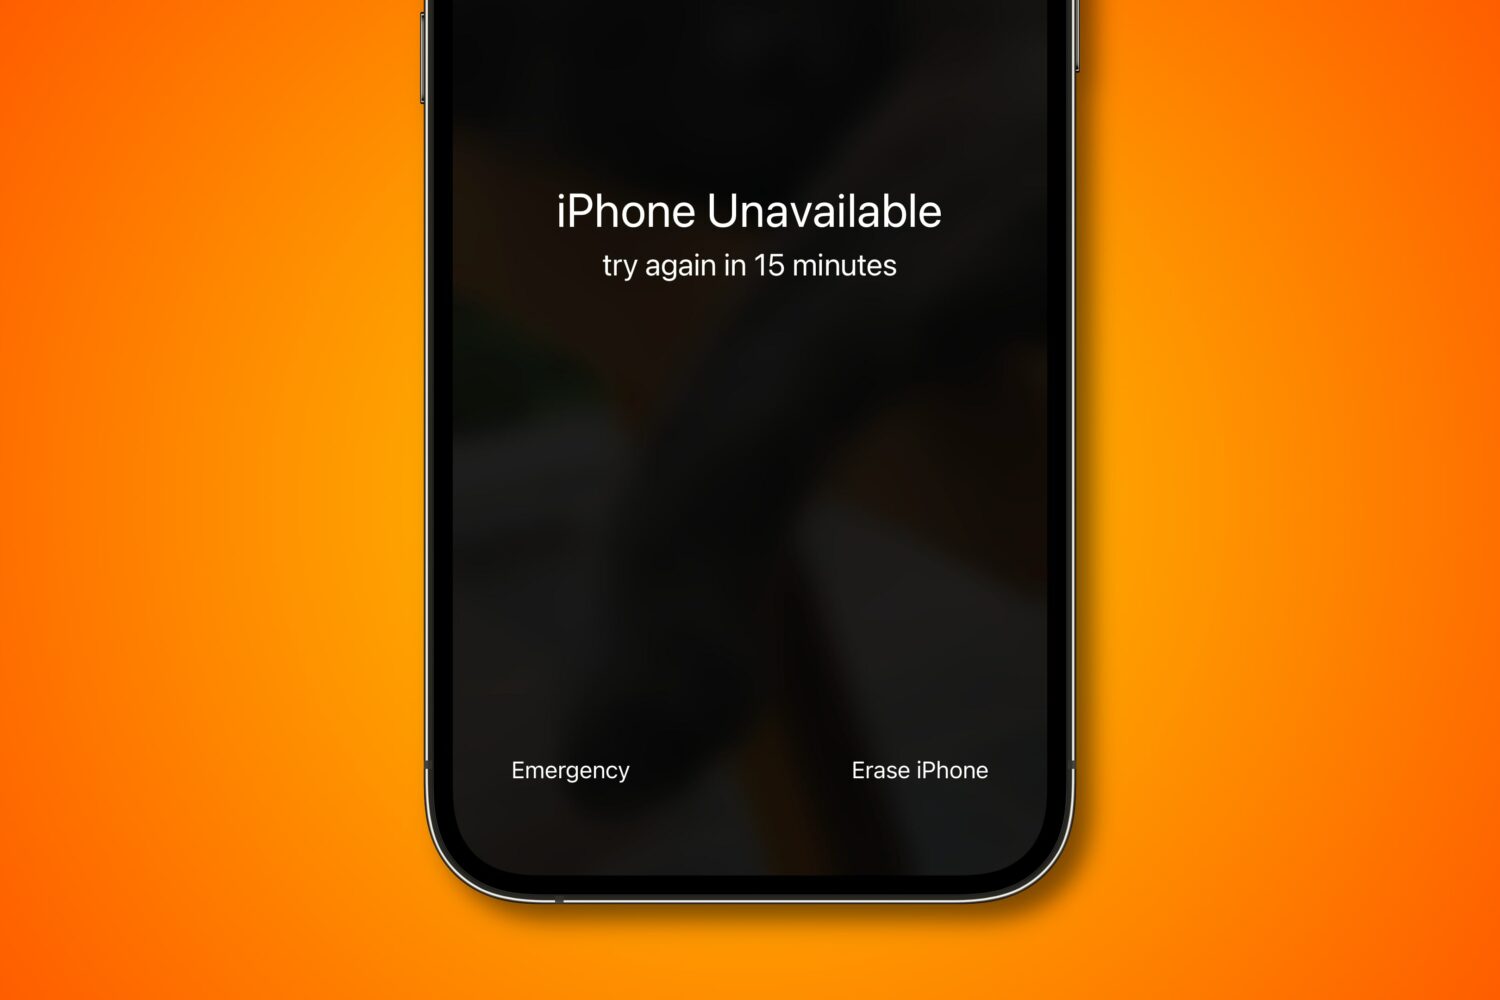 iPhone device screenshot with the "iPhone Unavailable" message on the lock screen and the "Erase iPhone" option in the bottom right, set against a vivid gradient background